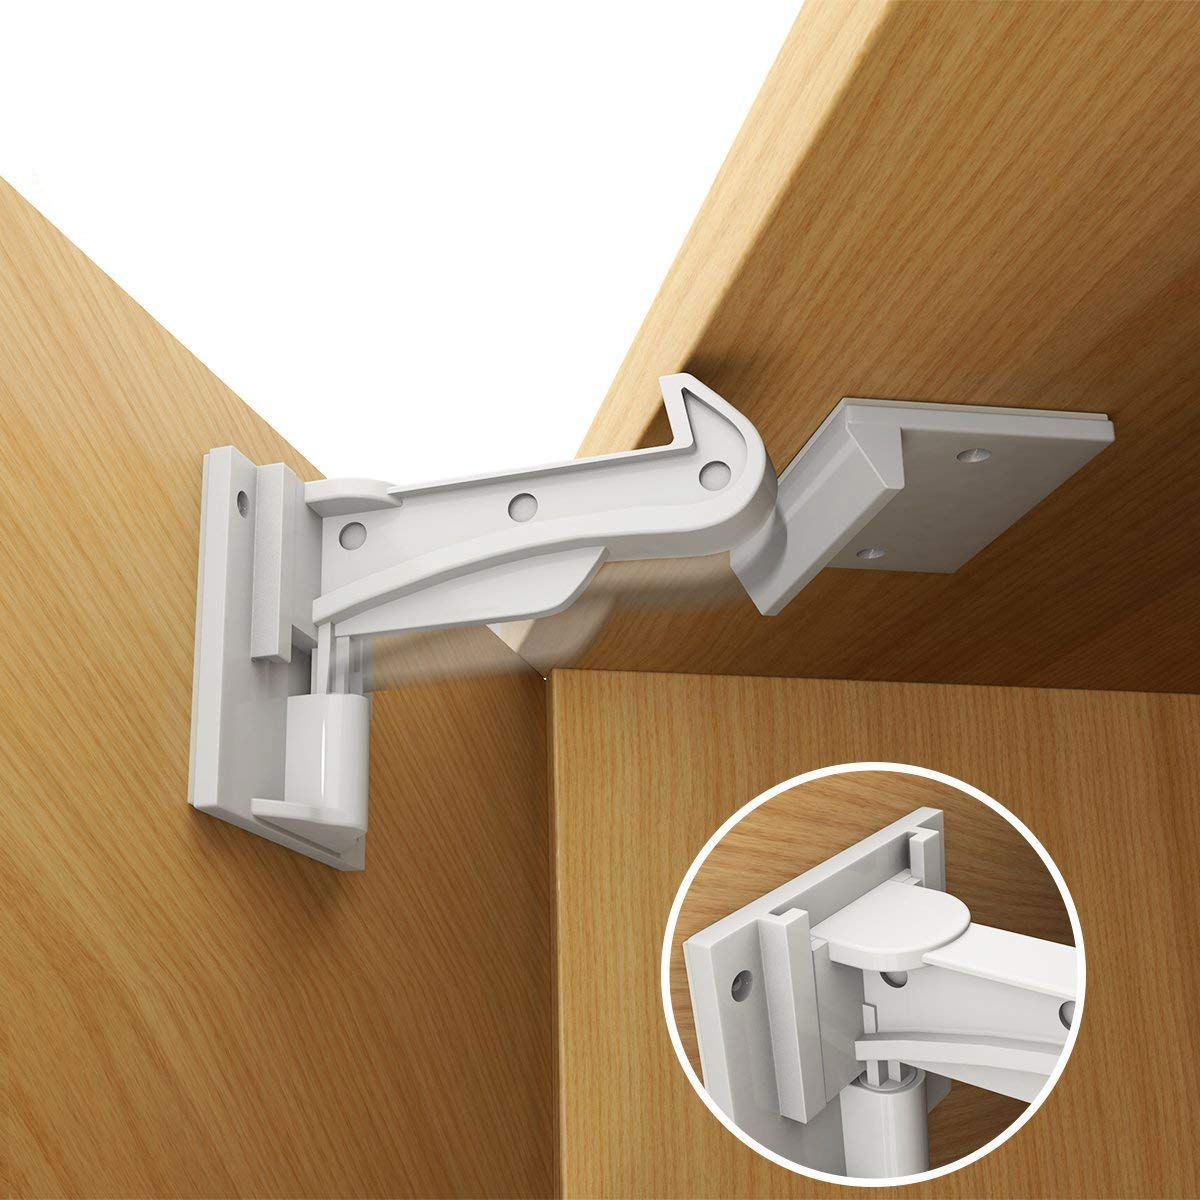 Cabinet Locks Child Safety Baby Proof Latches For Kitchen Bedroom Cabinets Cupboards Drawers With 3m Adhesive 20 S Durable Fixed Invisible Spring No Drill 10 Pack